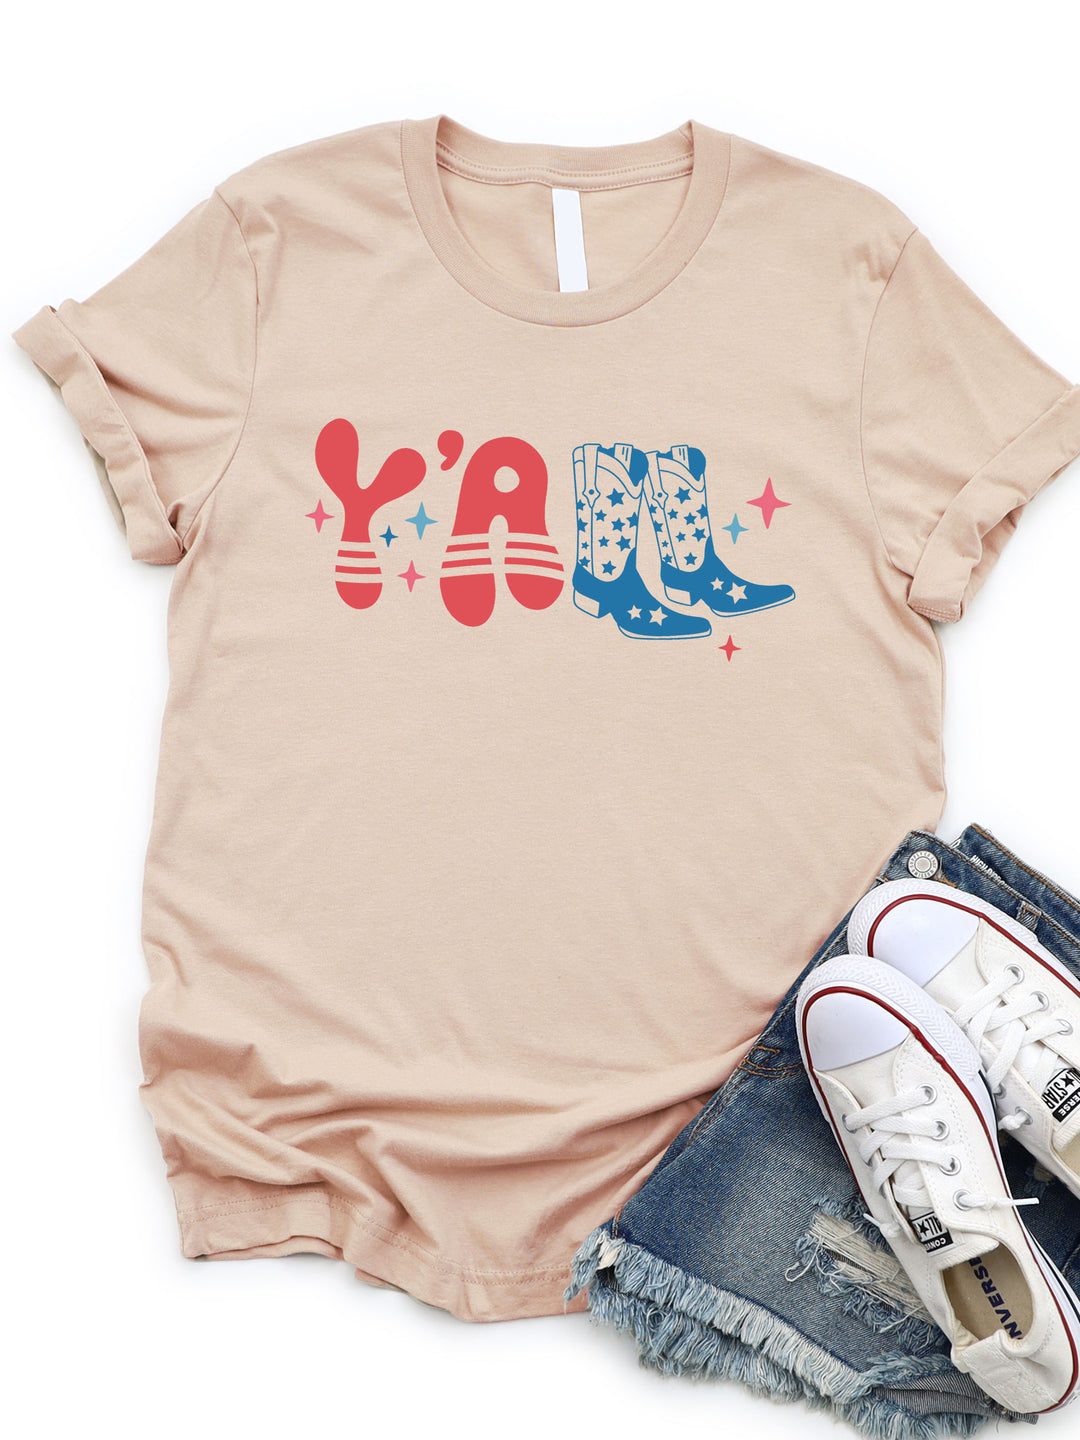 Y'all Boots Red White Blue Graphic Tee